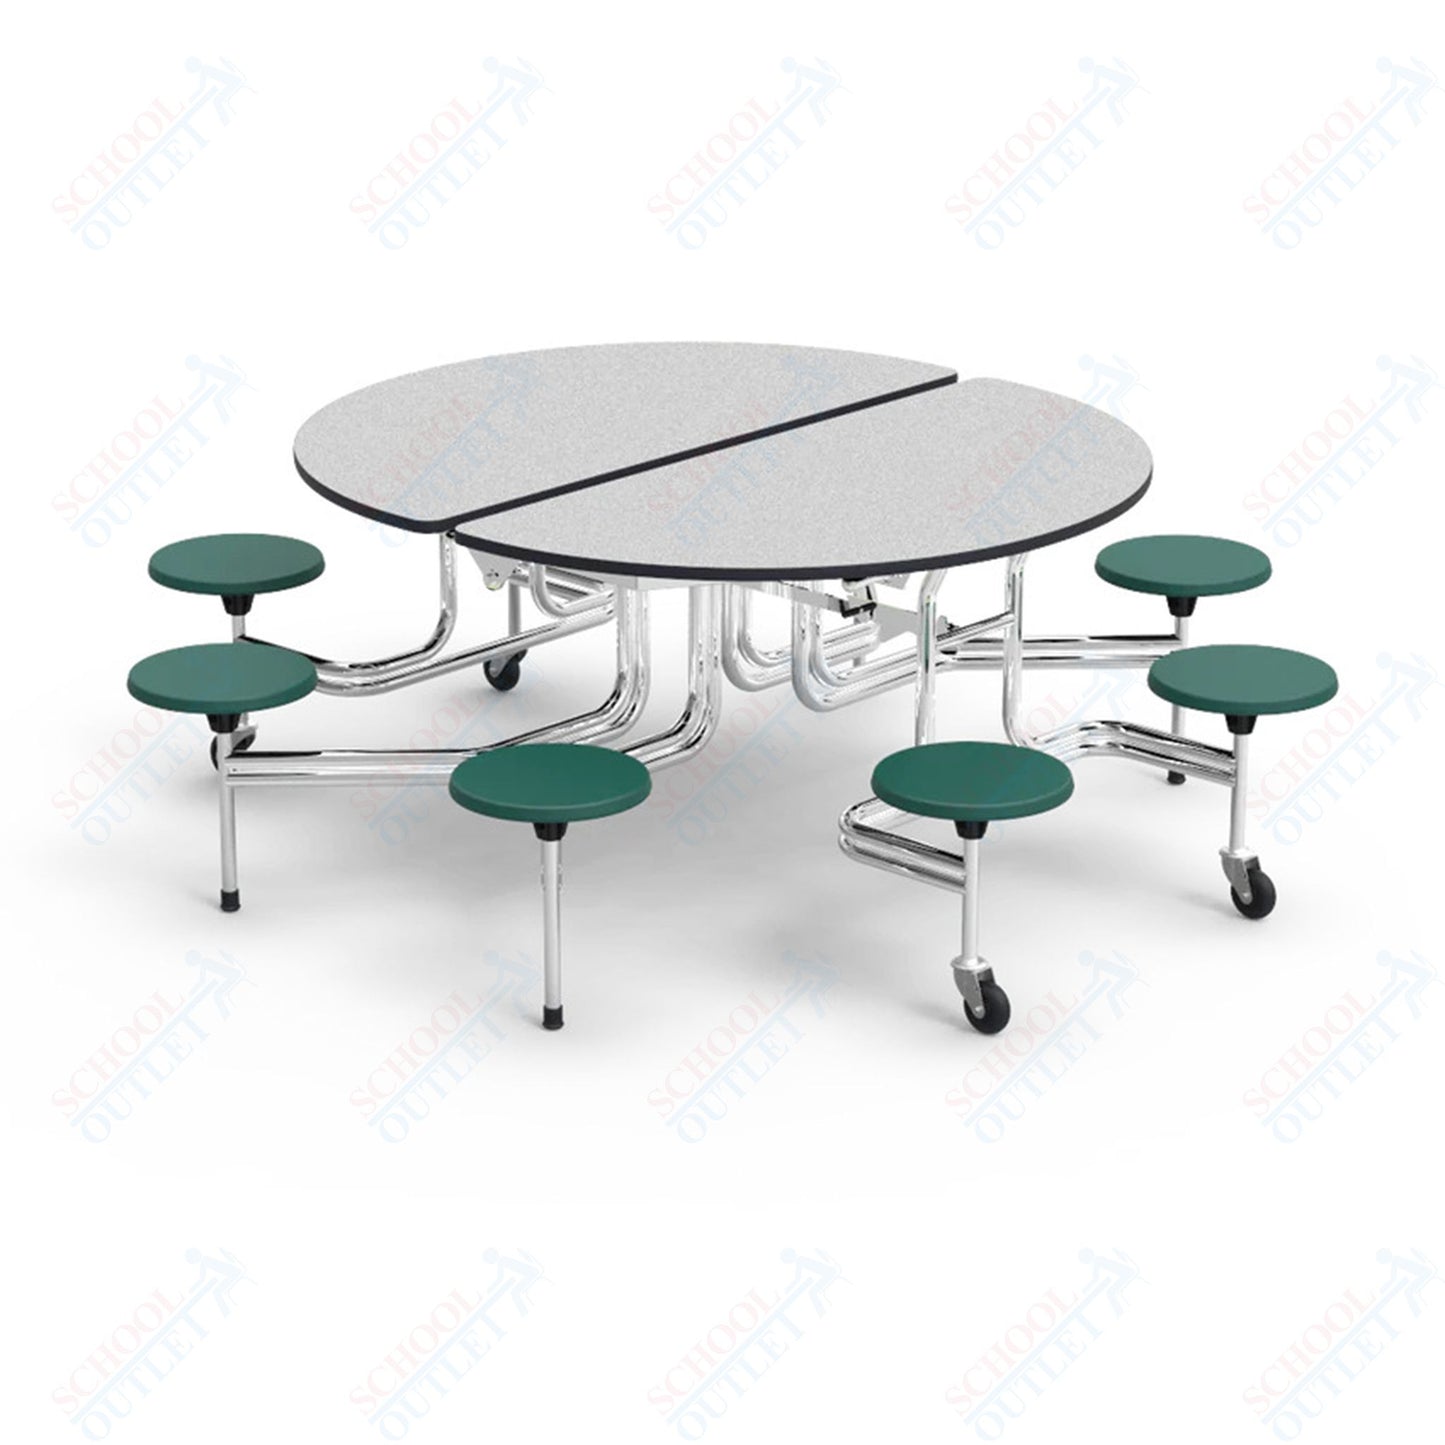 Virco MTSO152758 - Round Mobile Stool Cafeteria Table - T-mold Edge - 15" Seat Height - 8 Stools (Virco MTSO152758)